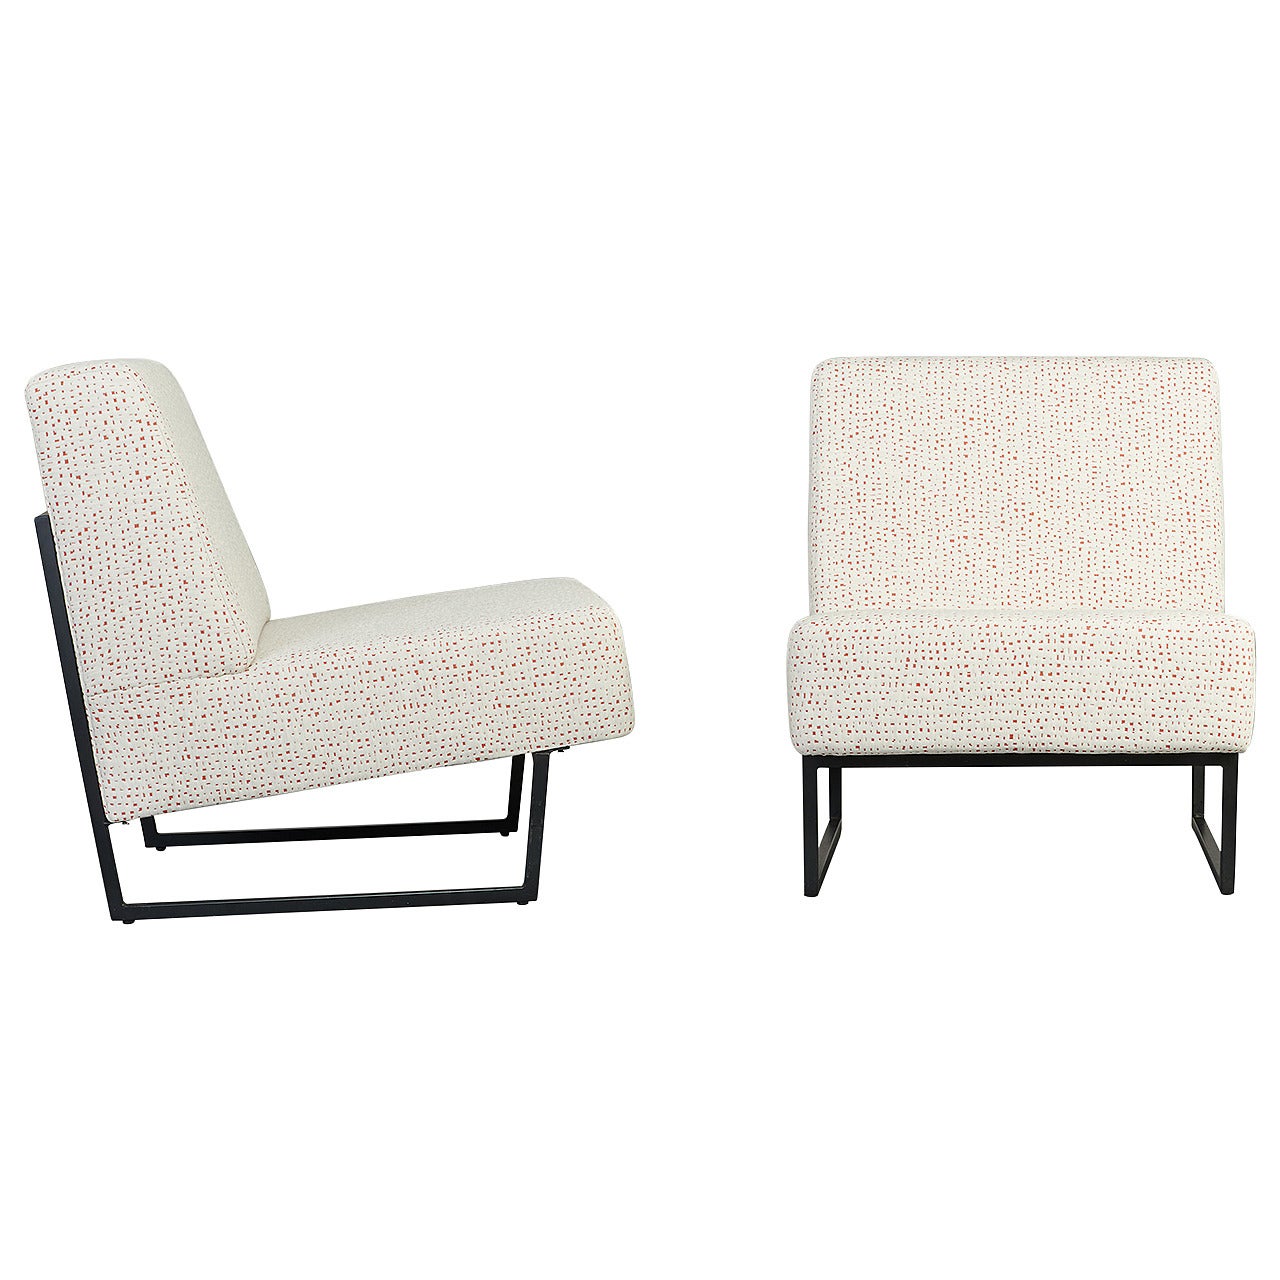 Pair of Chairs FG2 by Pierre Guariche, Sieges Temoins Edition, circa 1959-1960